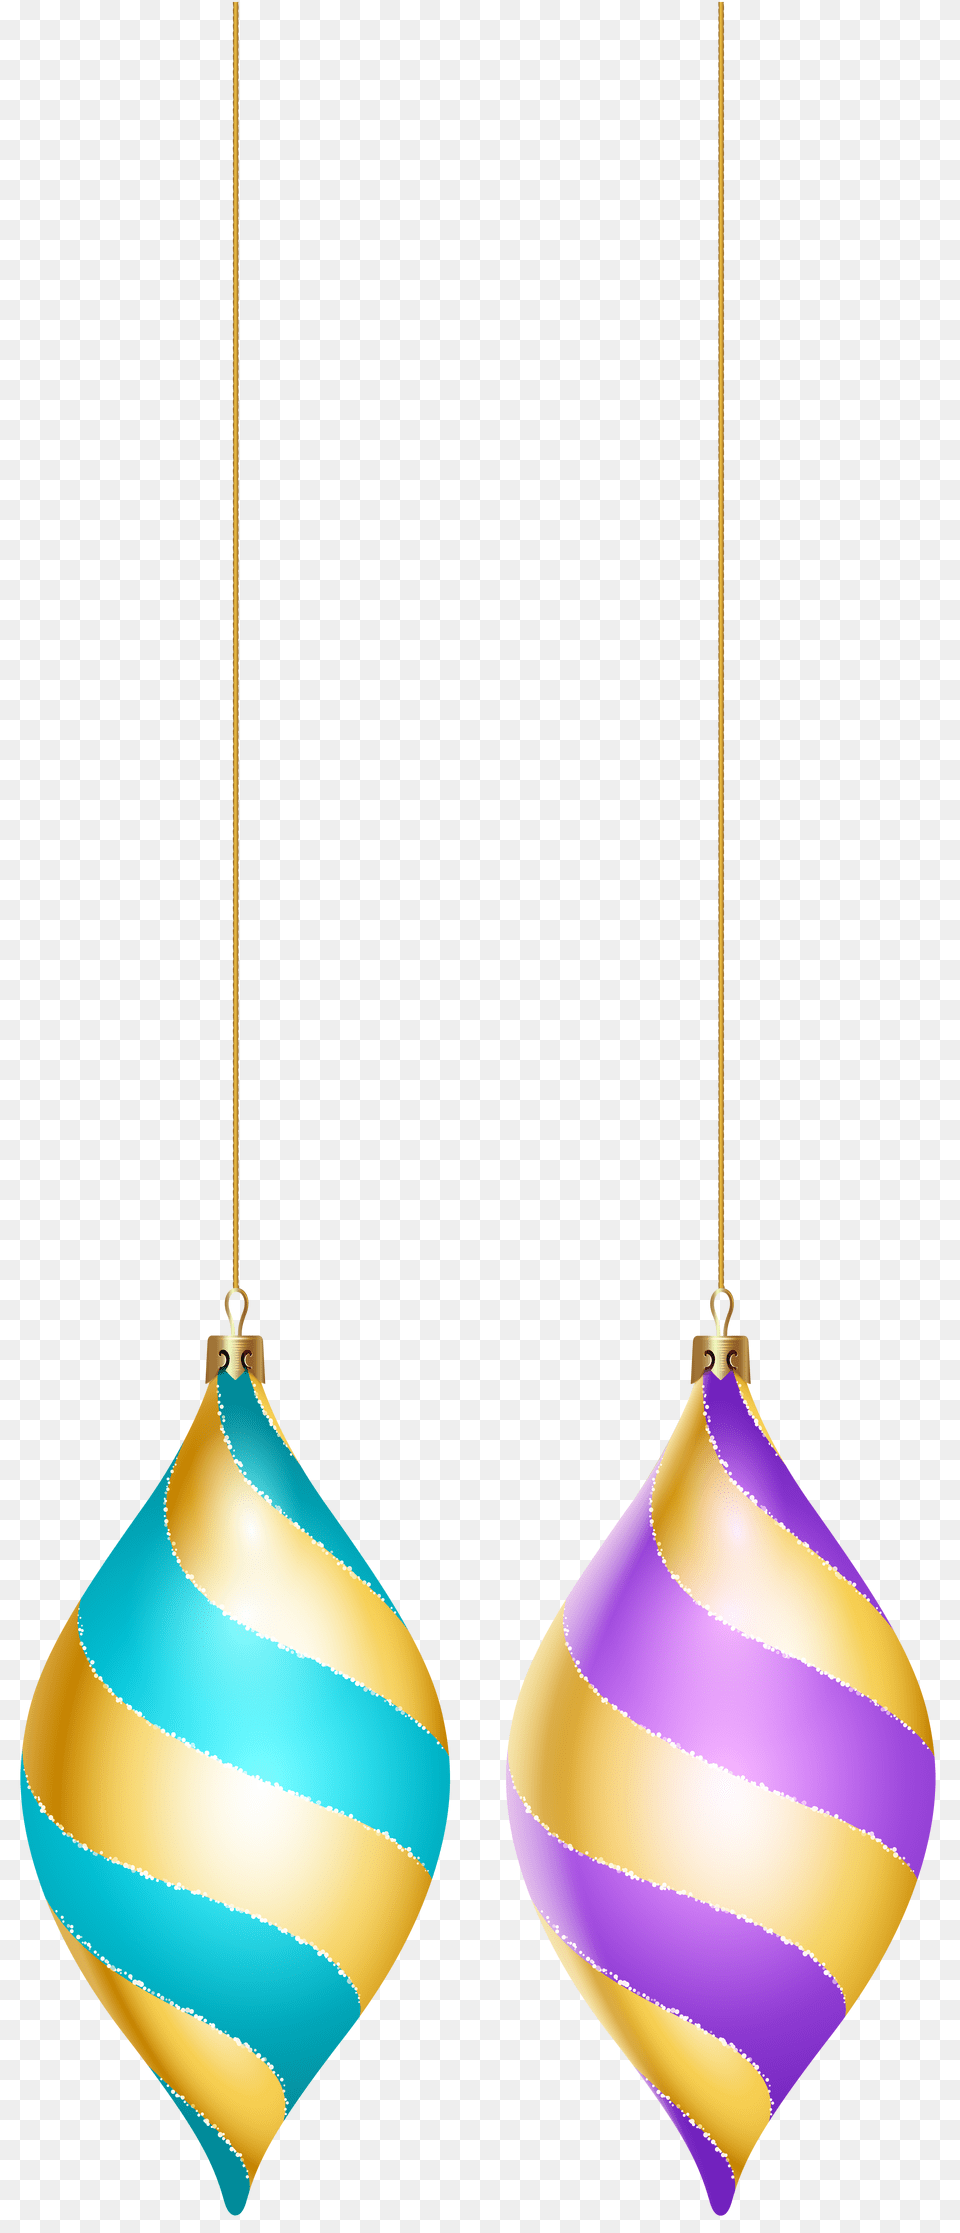 Christmas Tree Ornaments Clip Art Gallery, Gold, Lighting, Graphics, People Png Image